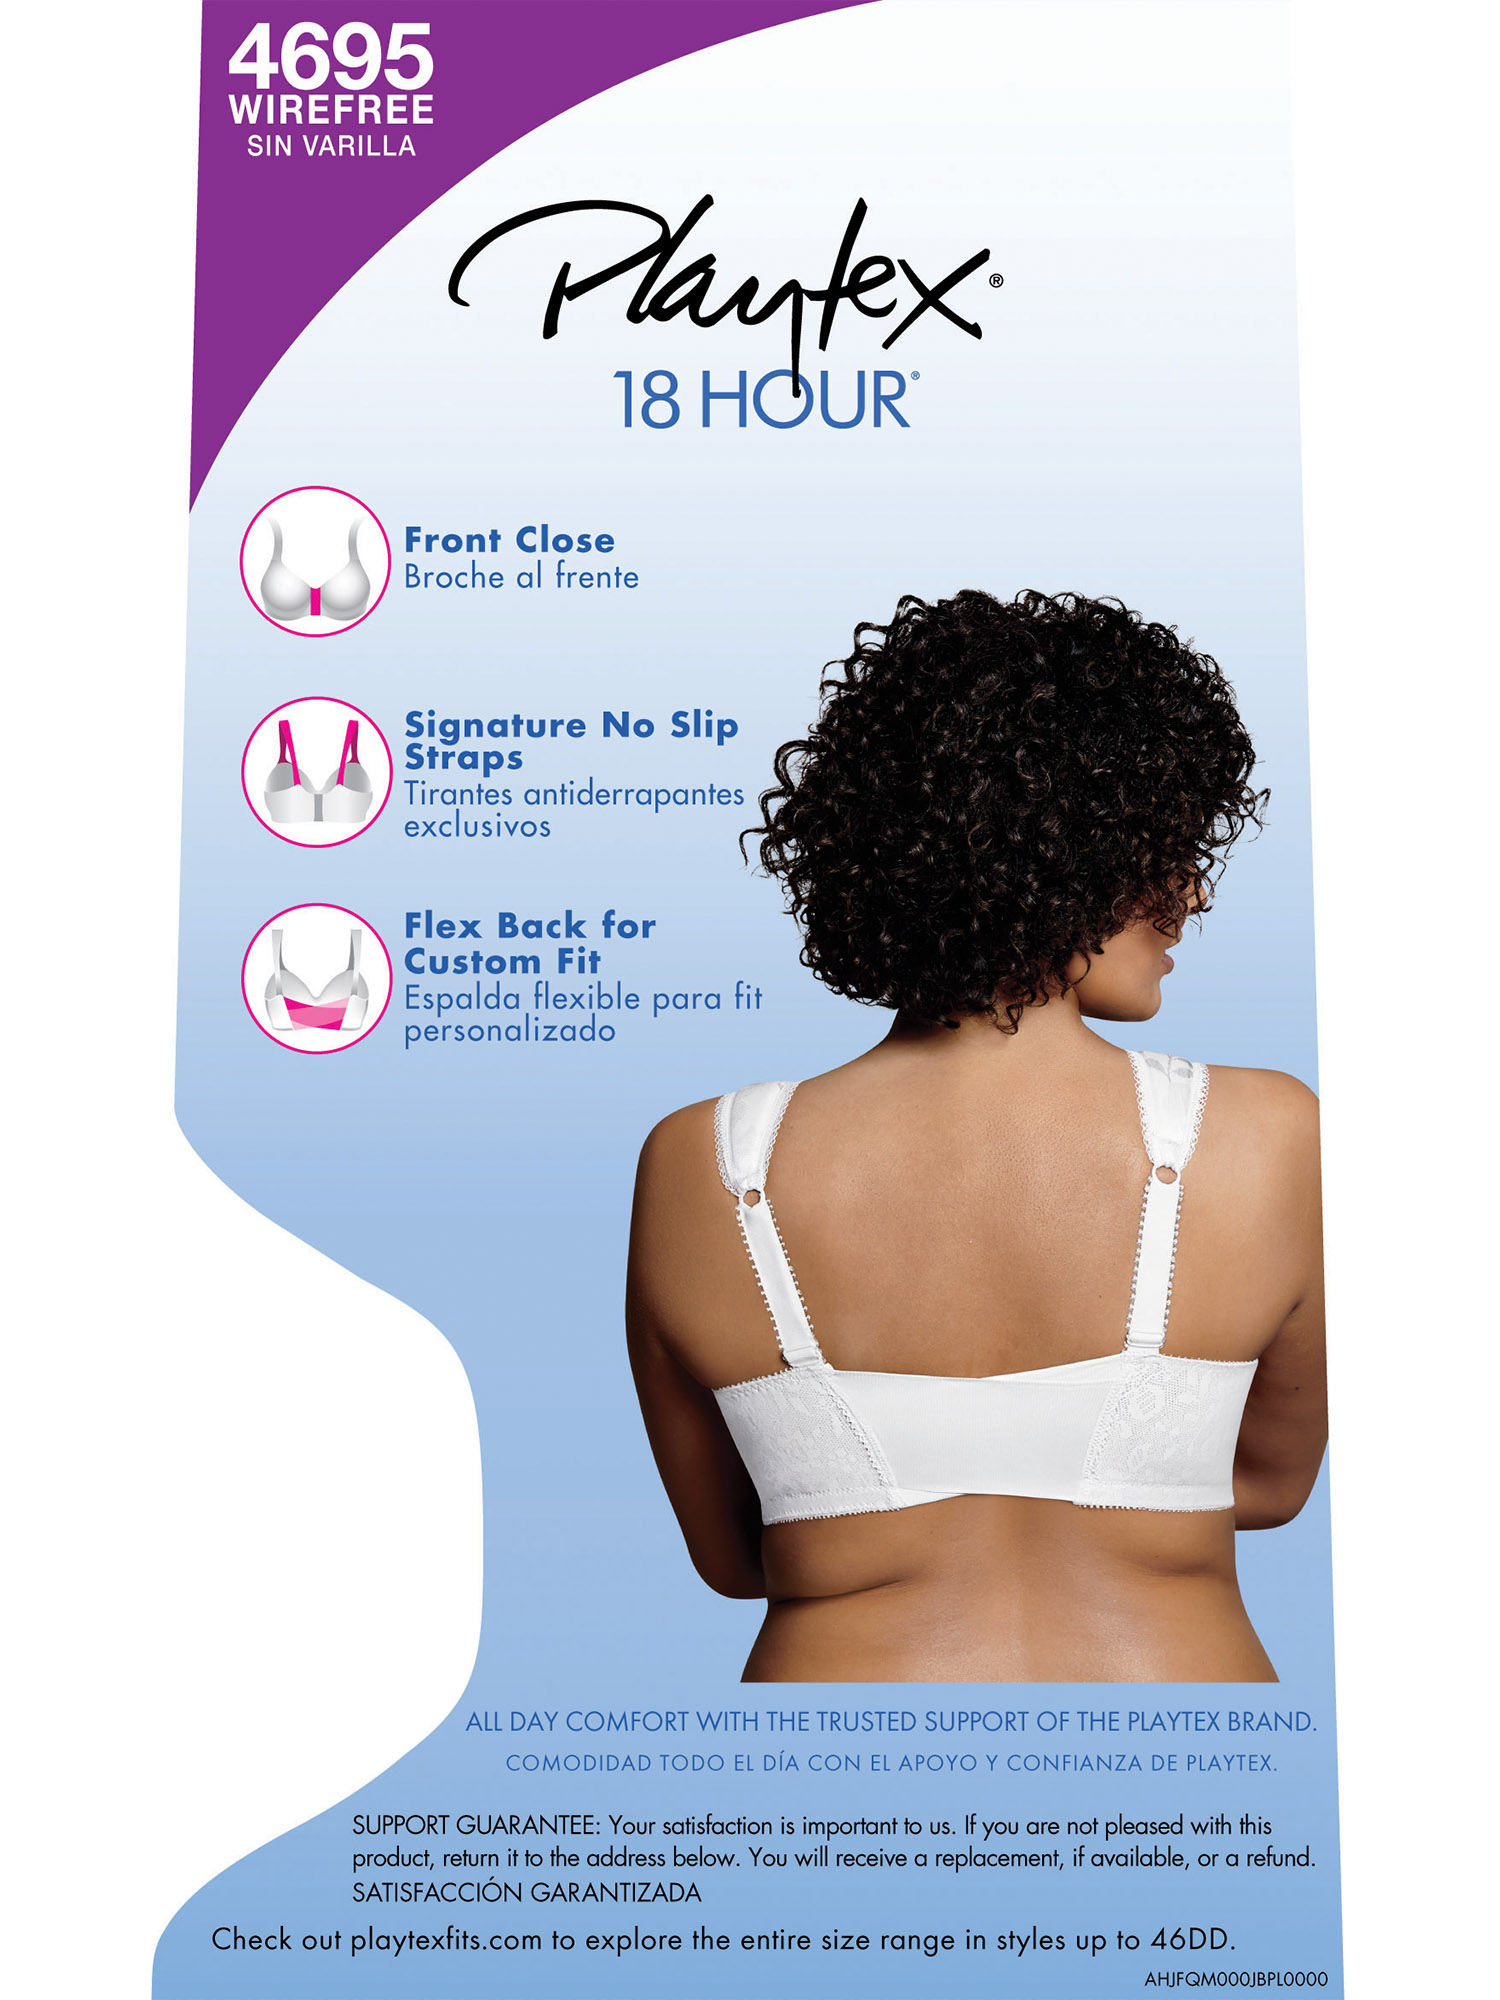 Playtex Wirefree Bra 18 Hour 4695 Front-Close With Flex Back M